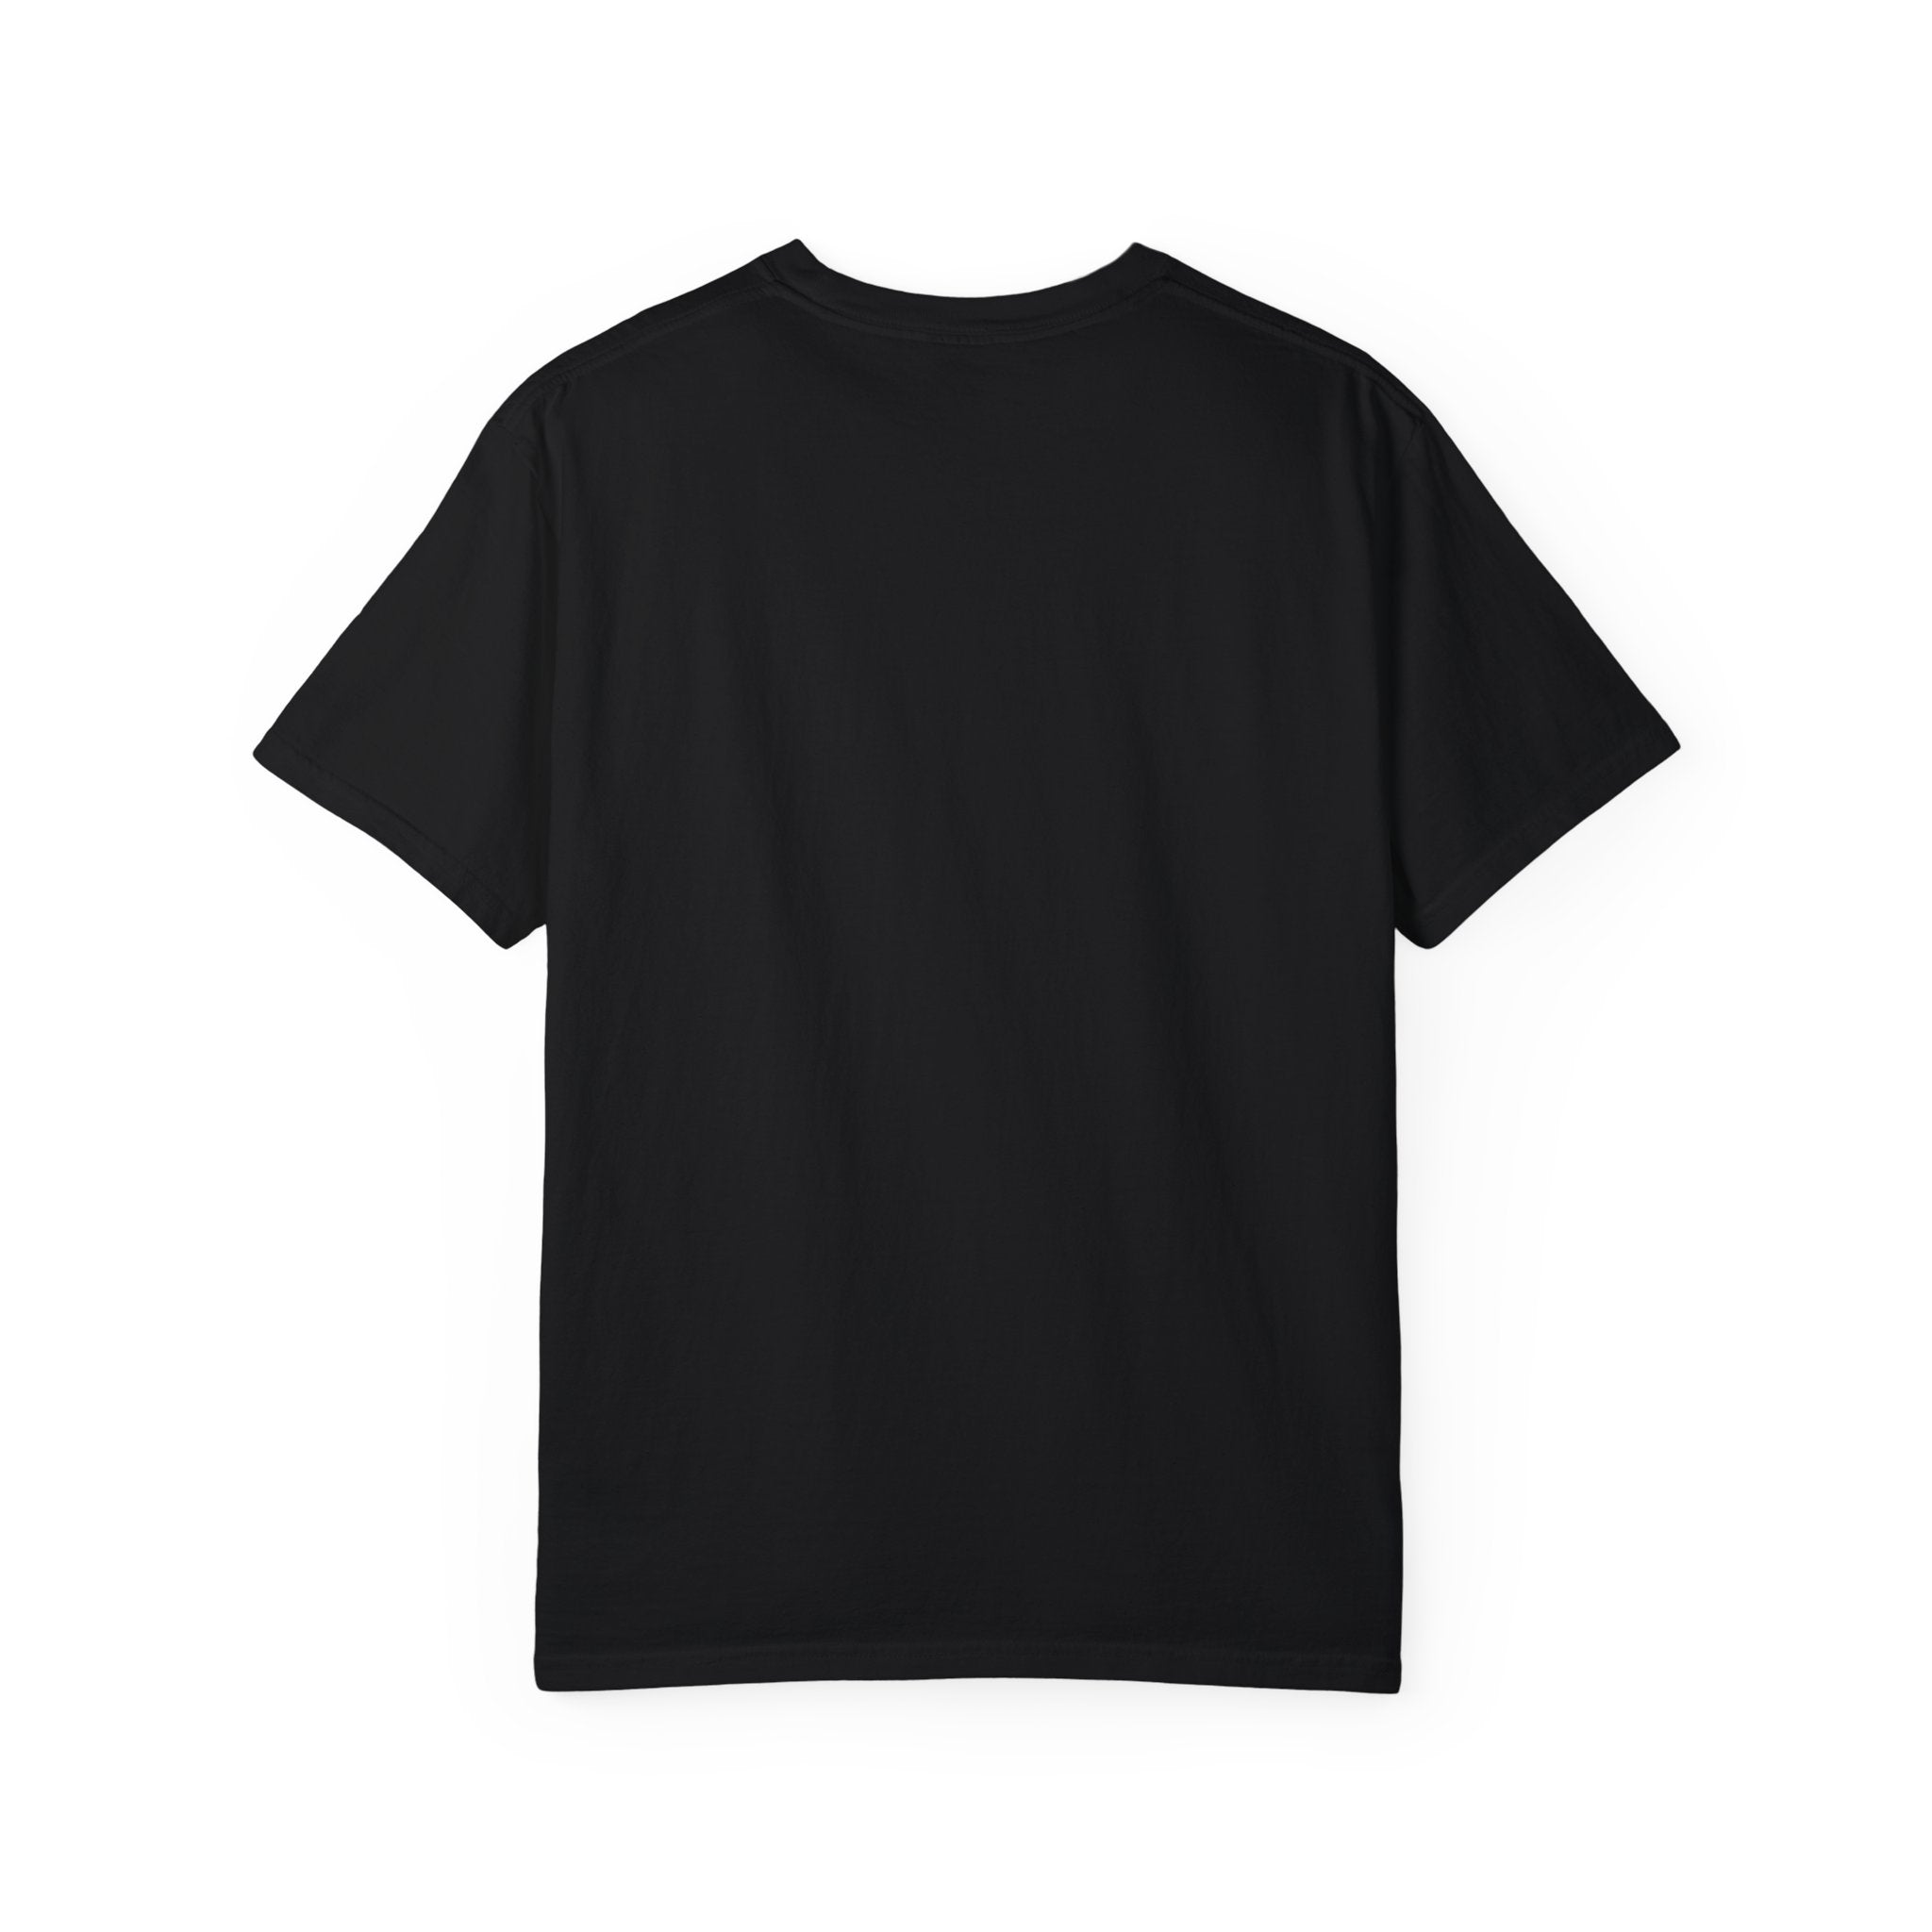 TWICE READY TO BE Unisex Garment-Dyed T-shirt